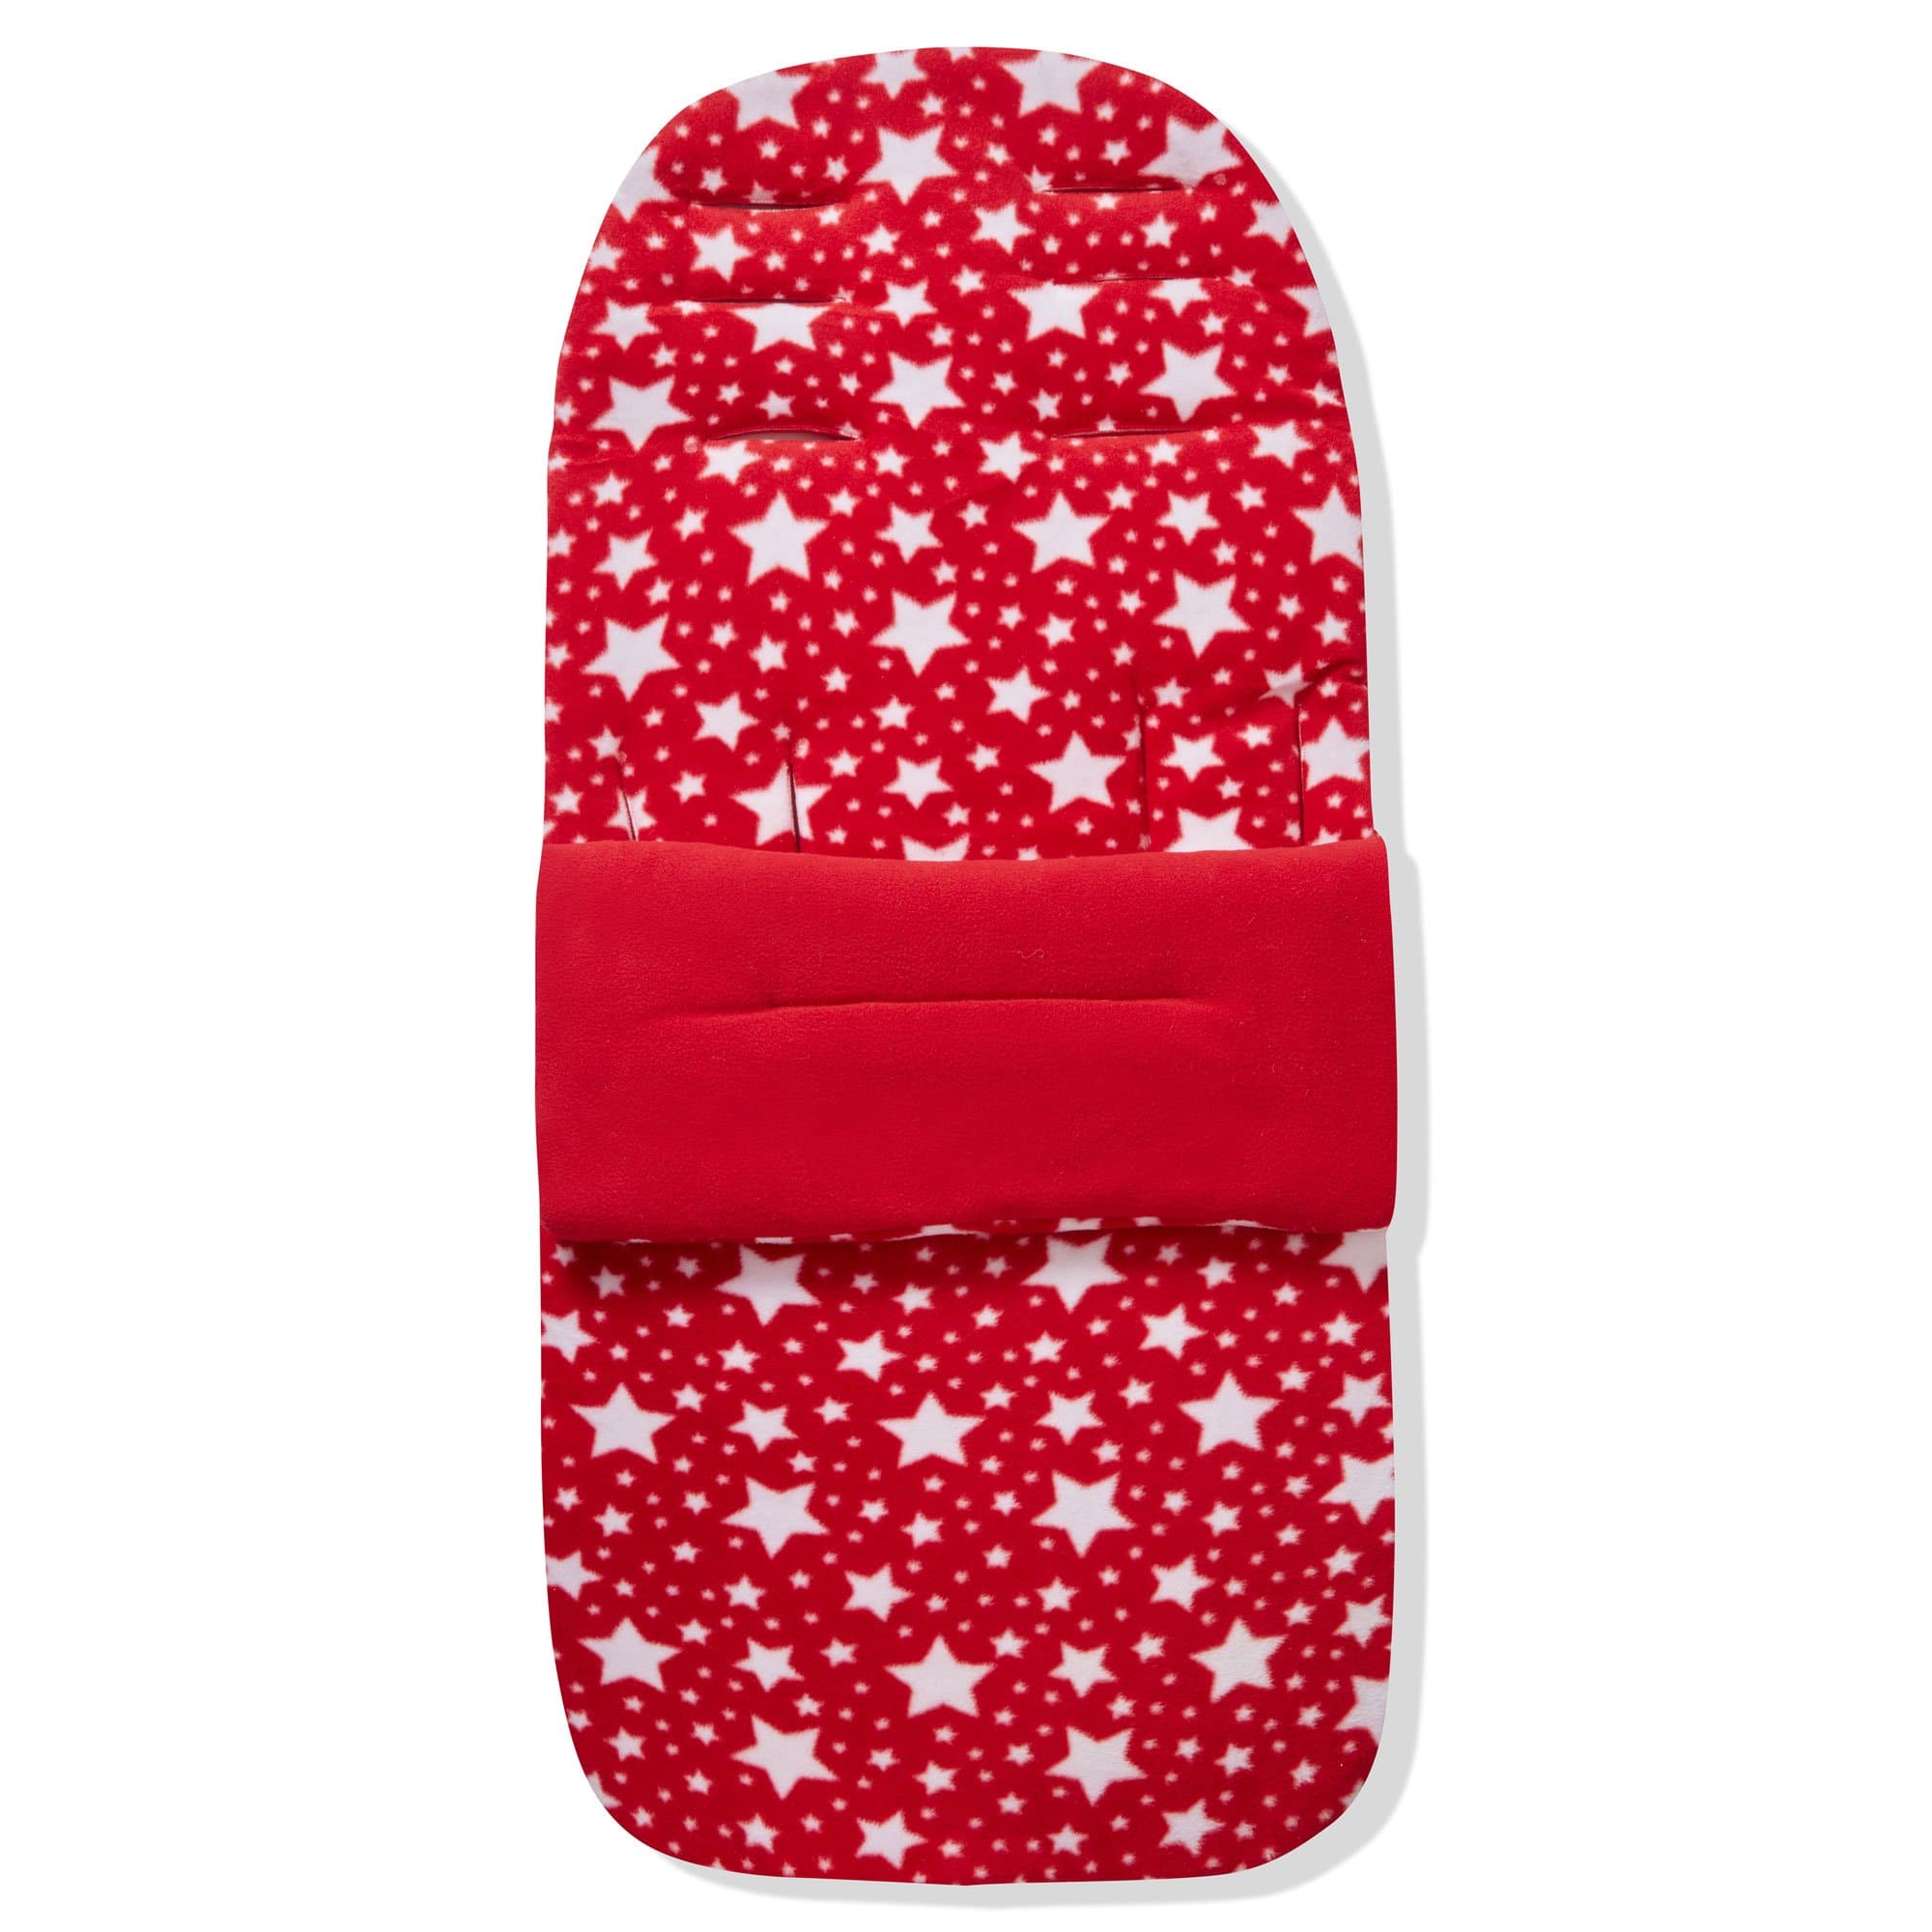 Fleece Footmuff / Cosy Toes Compatible with Silver Cross - Red Star / Fits All Models | For Your Little One